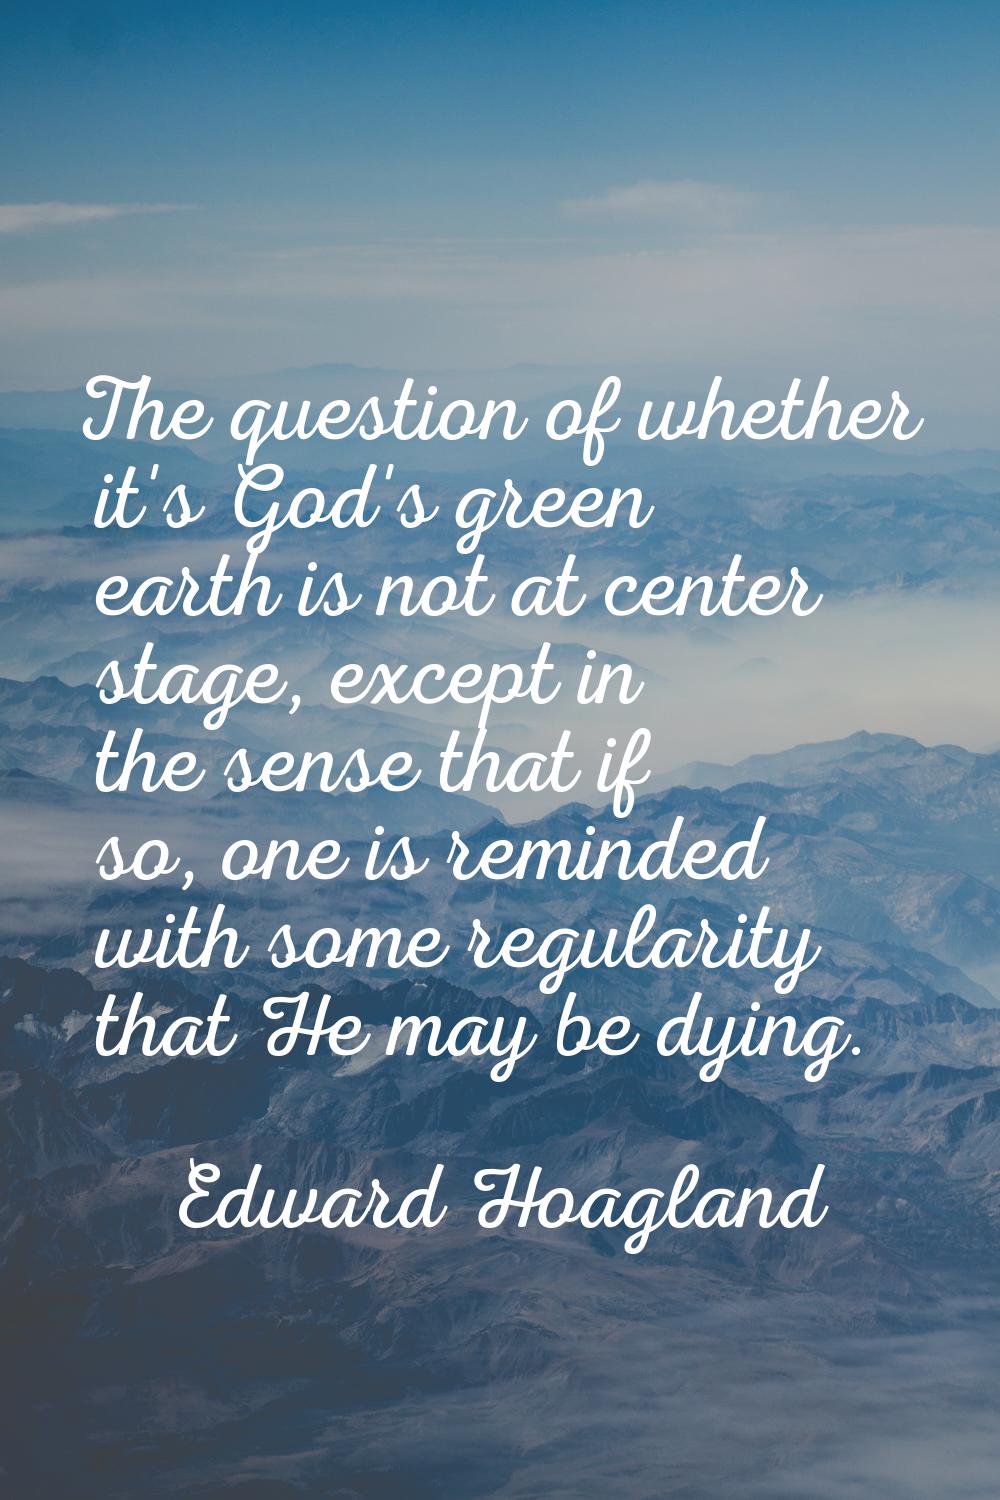 The question of whether it's God's green earth is not at center stage, except in the sense that if 